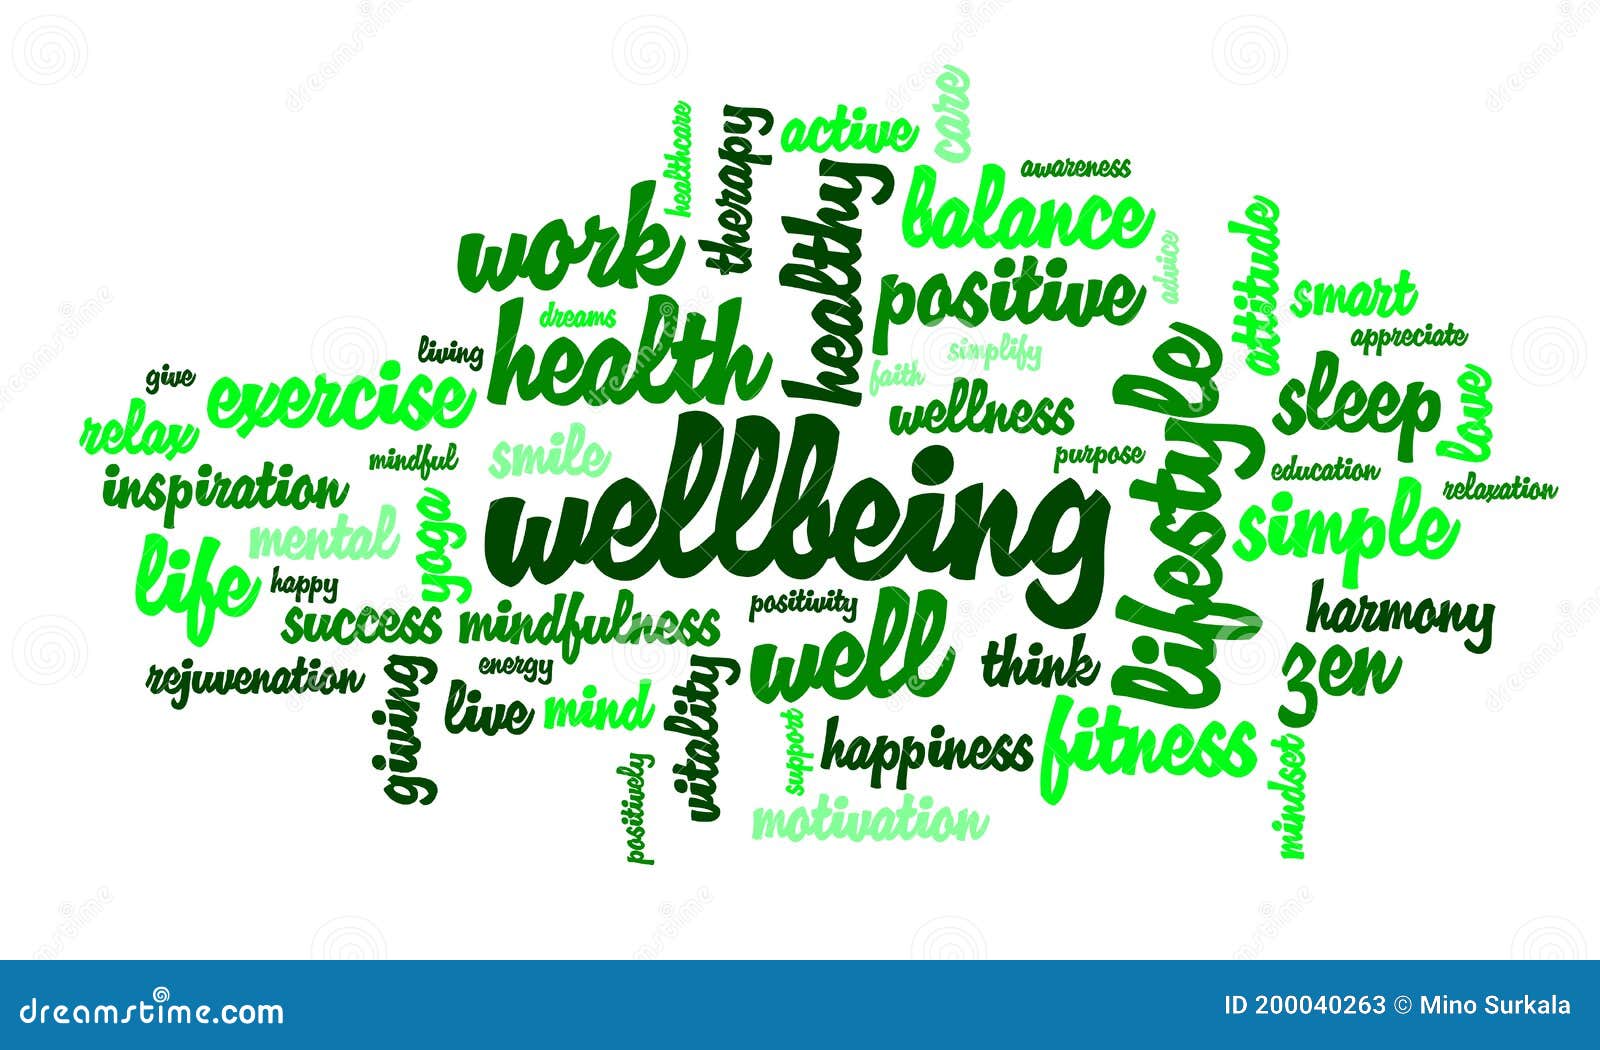 wordcloud with word wellbeing and other tags connected with mental health and positivity